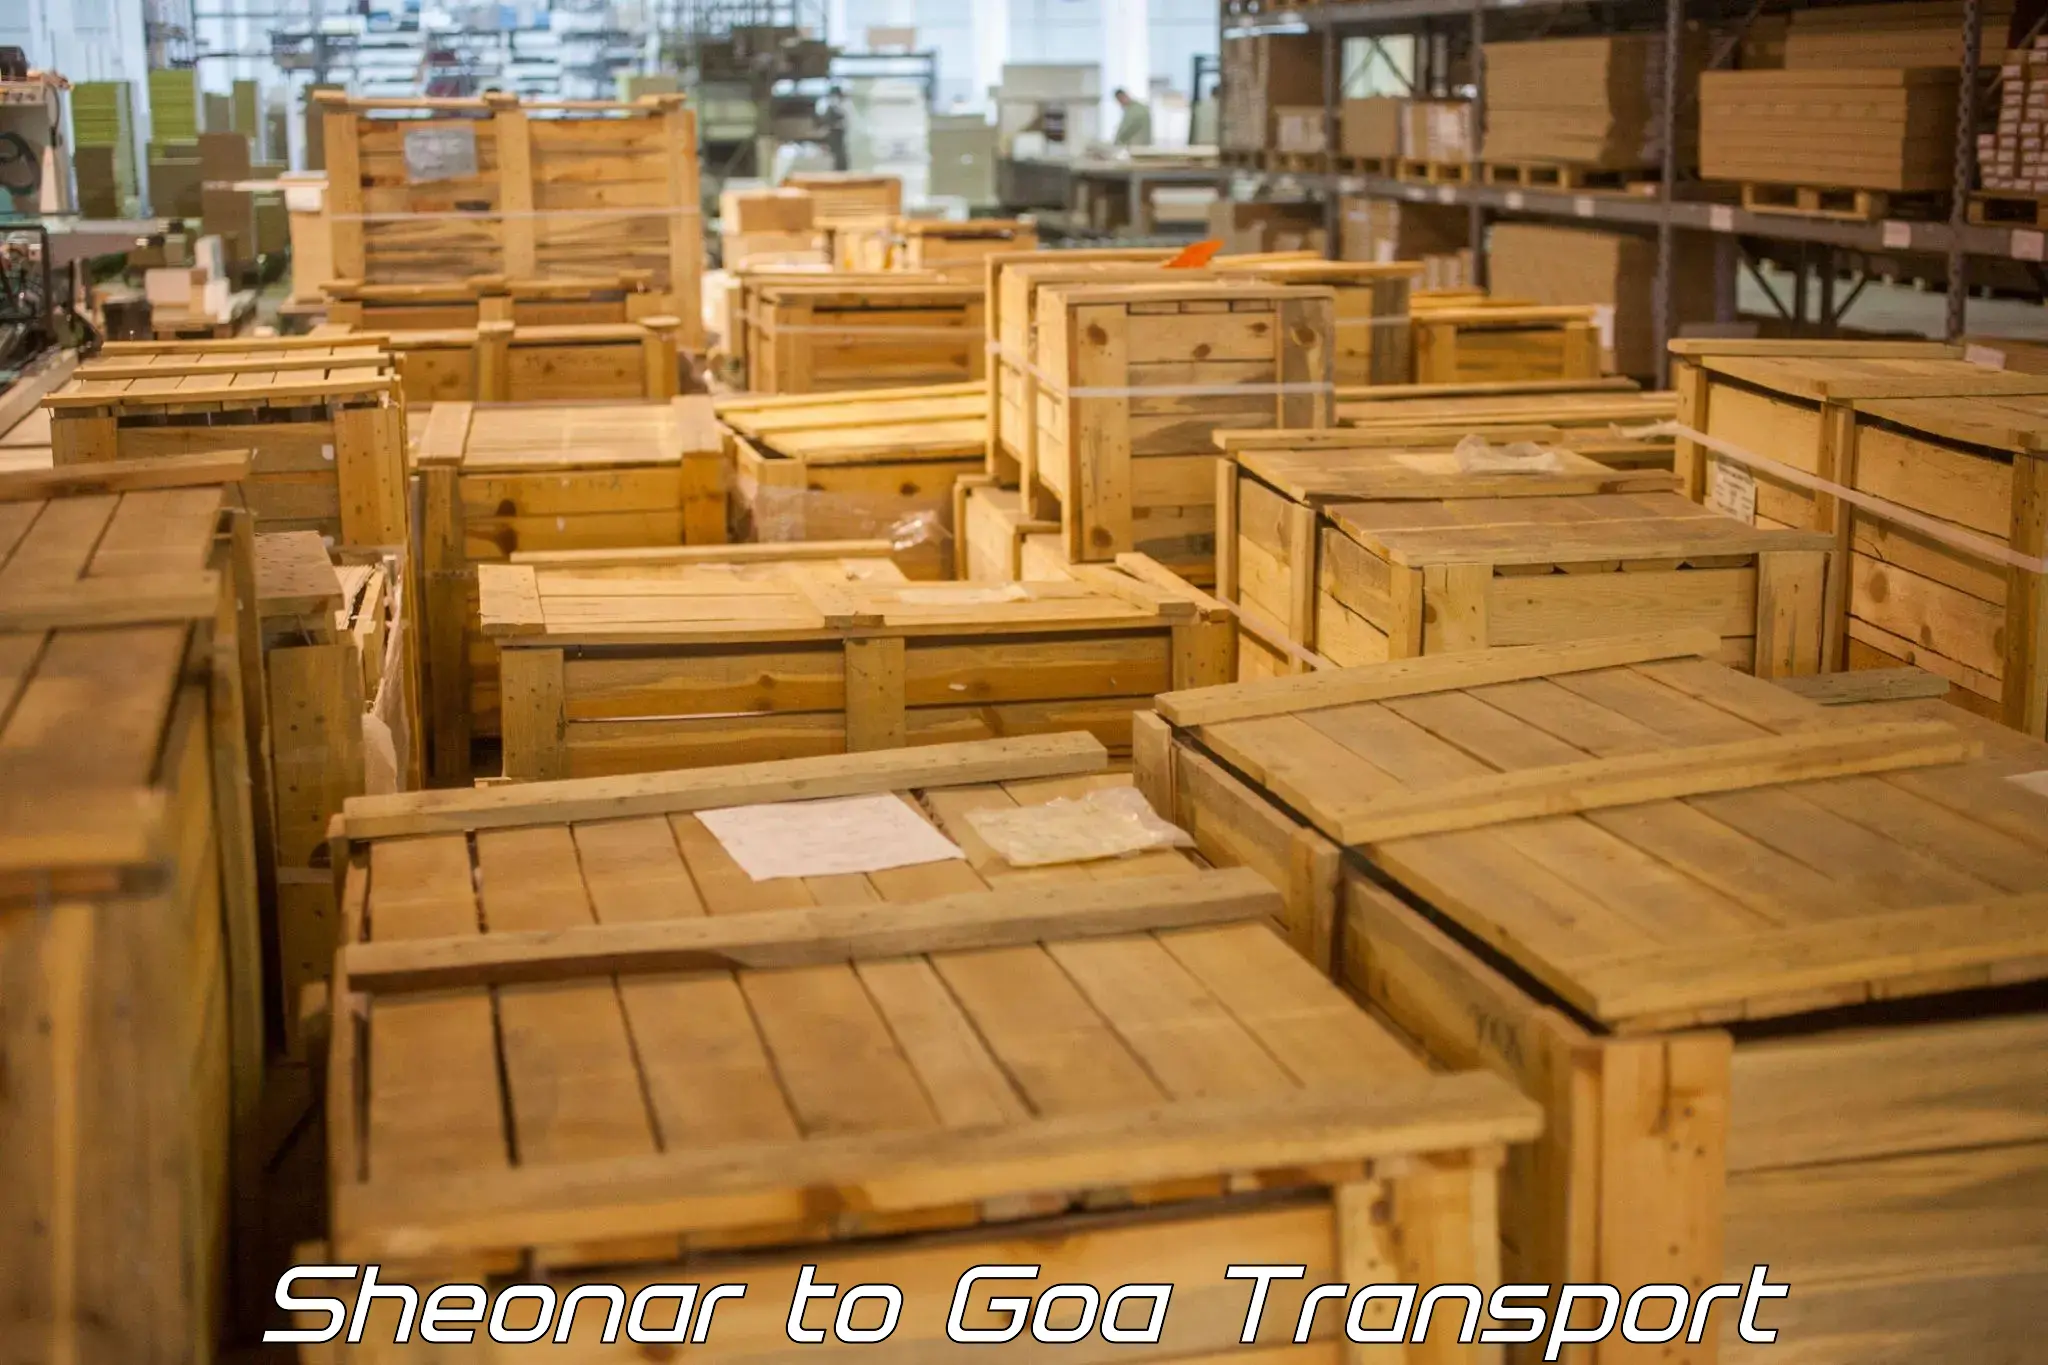 Nationwide transport services Sheonar to Goa